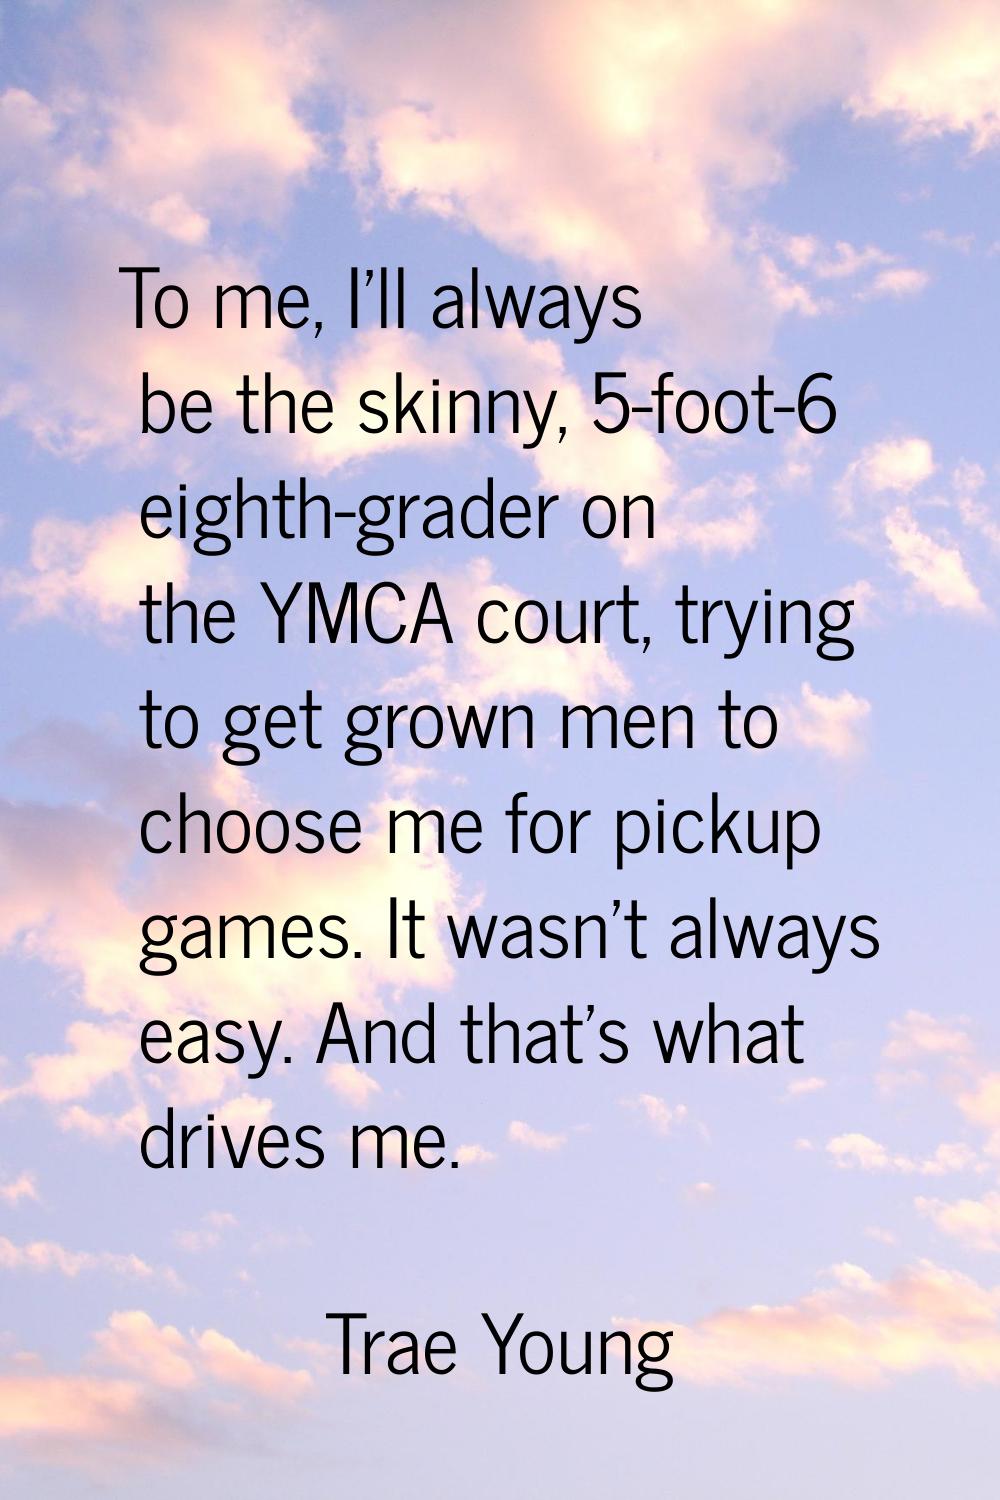 To me, I'll always be the skinny, 5-foot-6 eighth-grader on the YMCA court, trying to get grown men